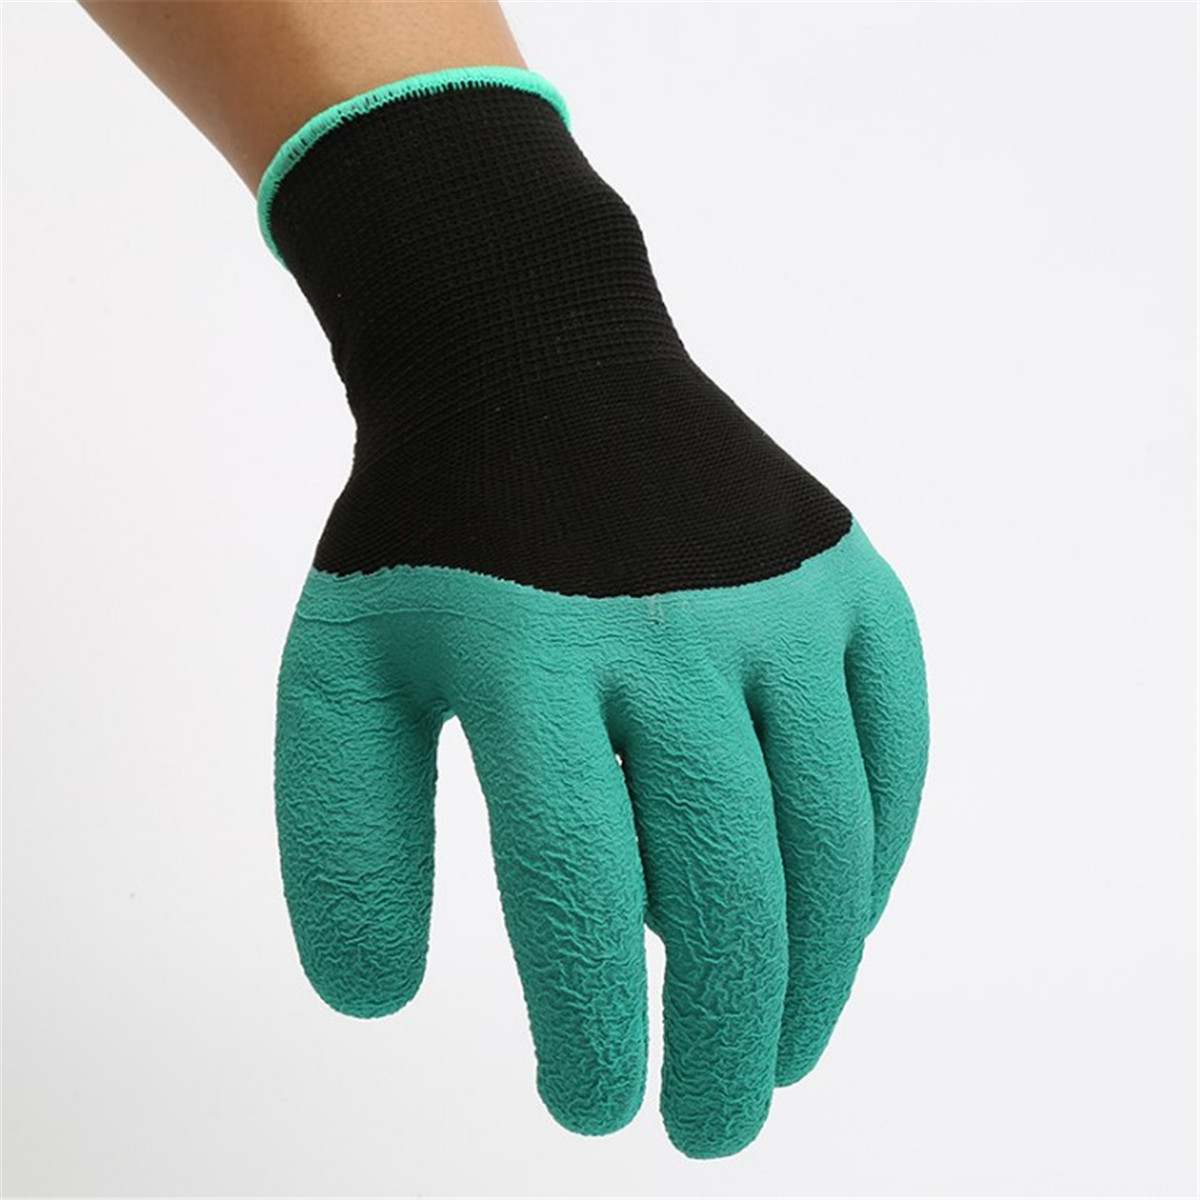 1-Pair-Safety-Gloves-Garden-Gloves-Rubber-TPR-Thermo-Plastic-Builders-Work-ABS-Plastic-Claws-1193187